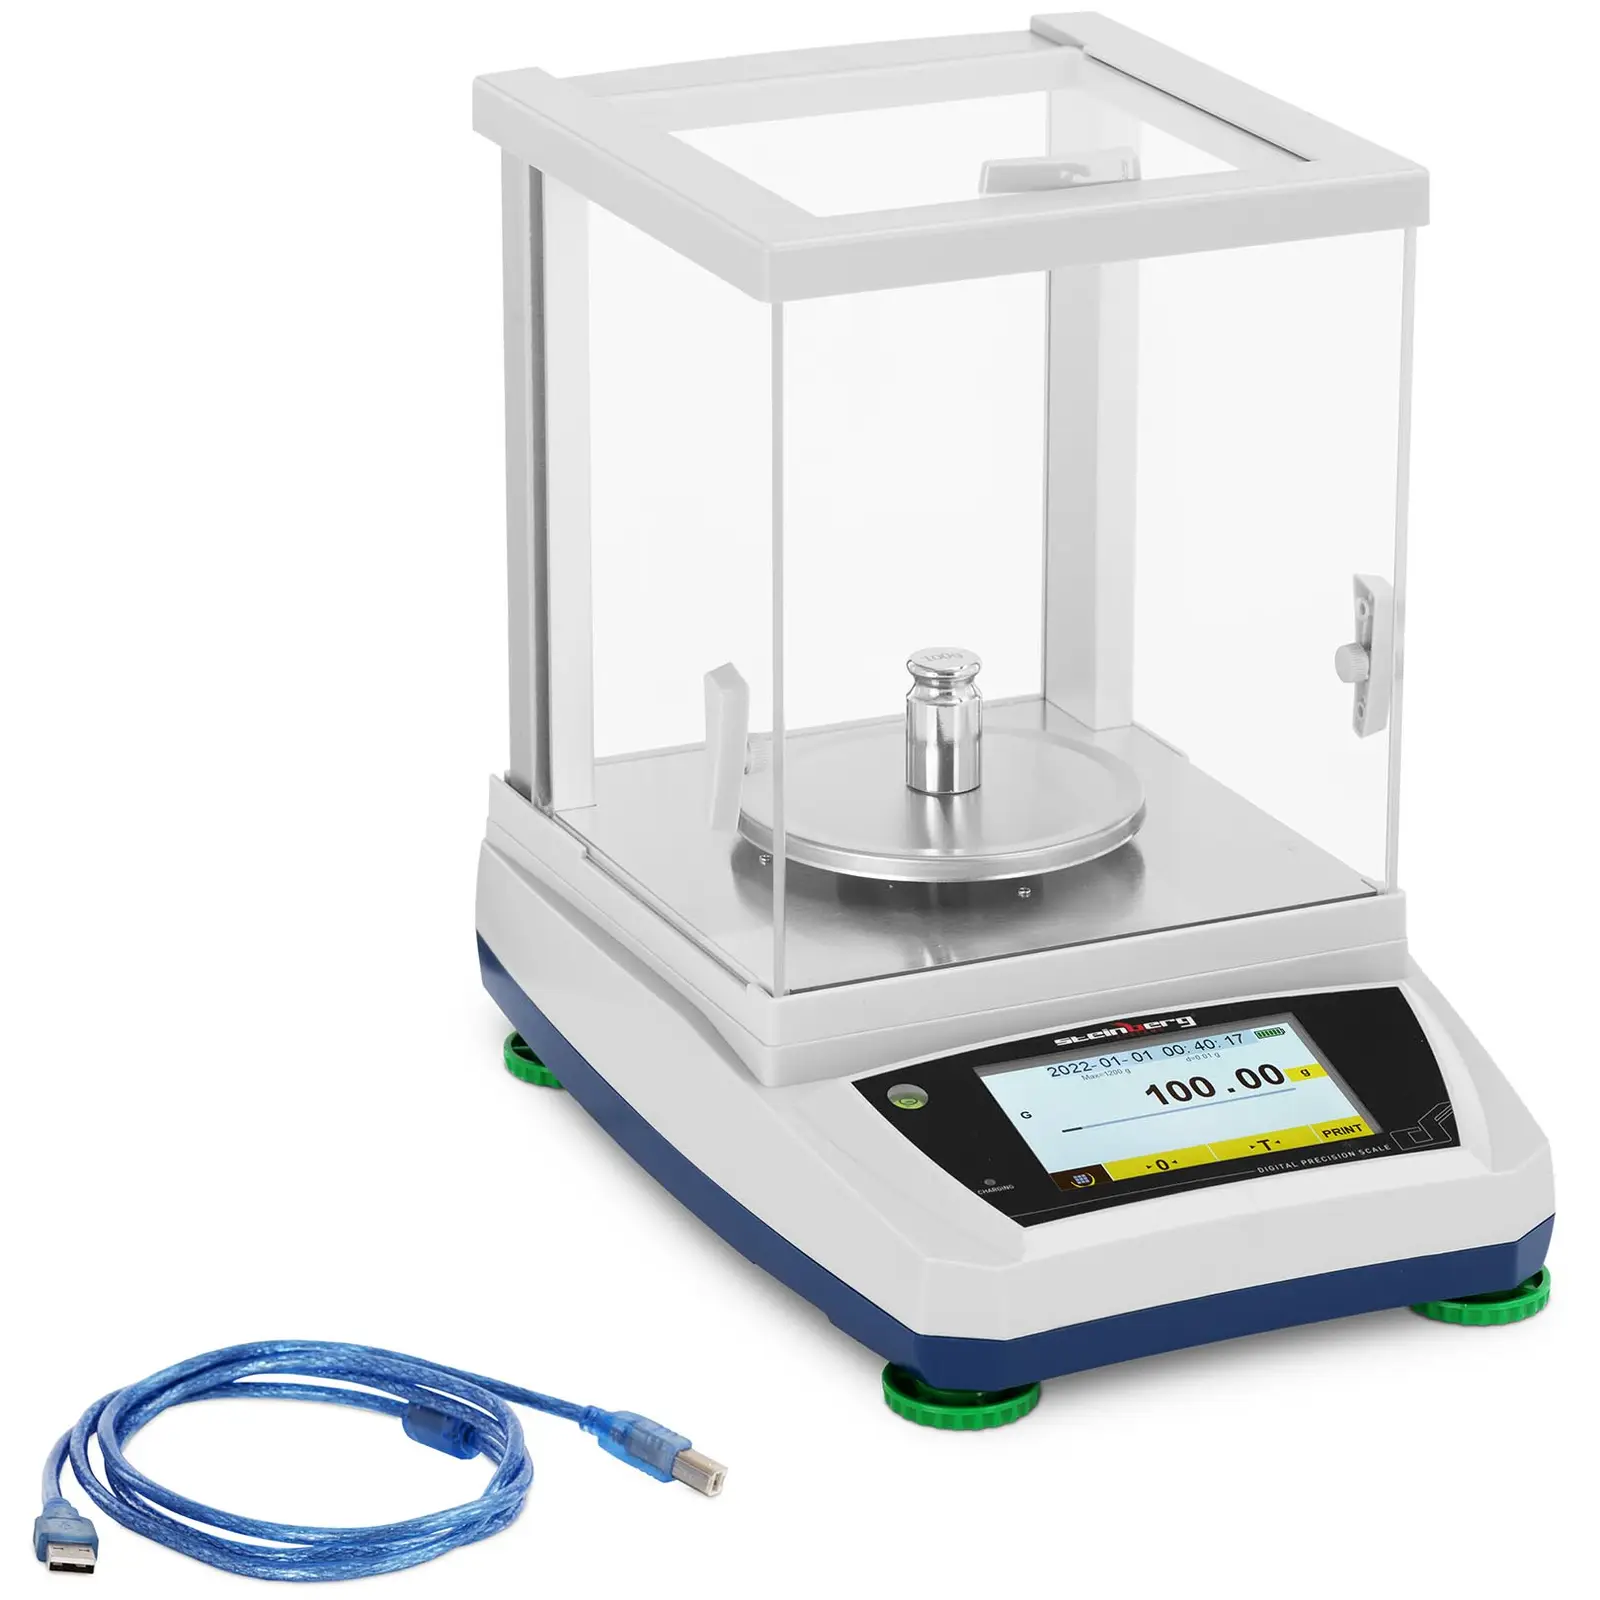 Factory second Precision Scale - 1200 g / 0.01 g - Ø 115 mm - Touch-LCD - large glass draft shield